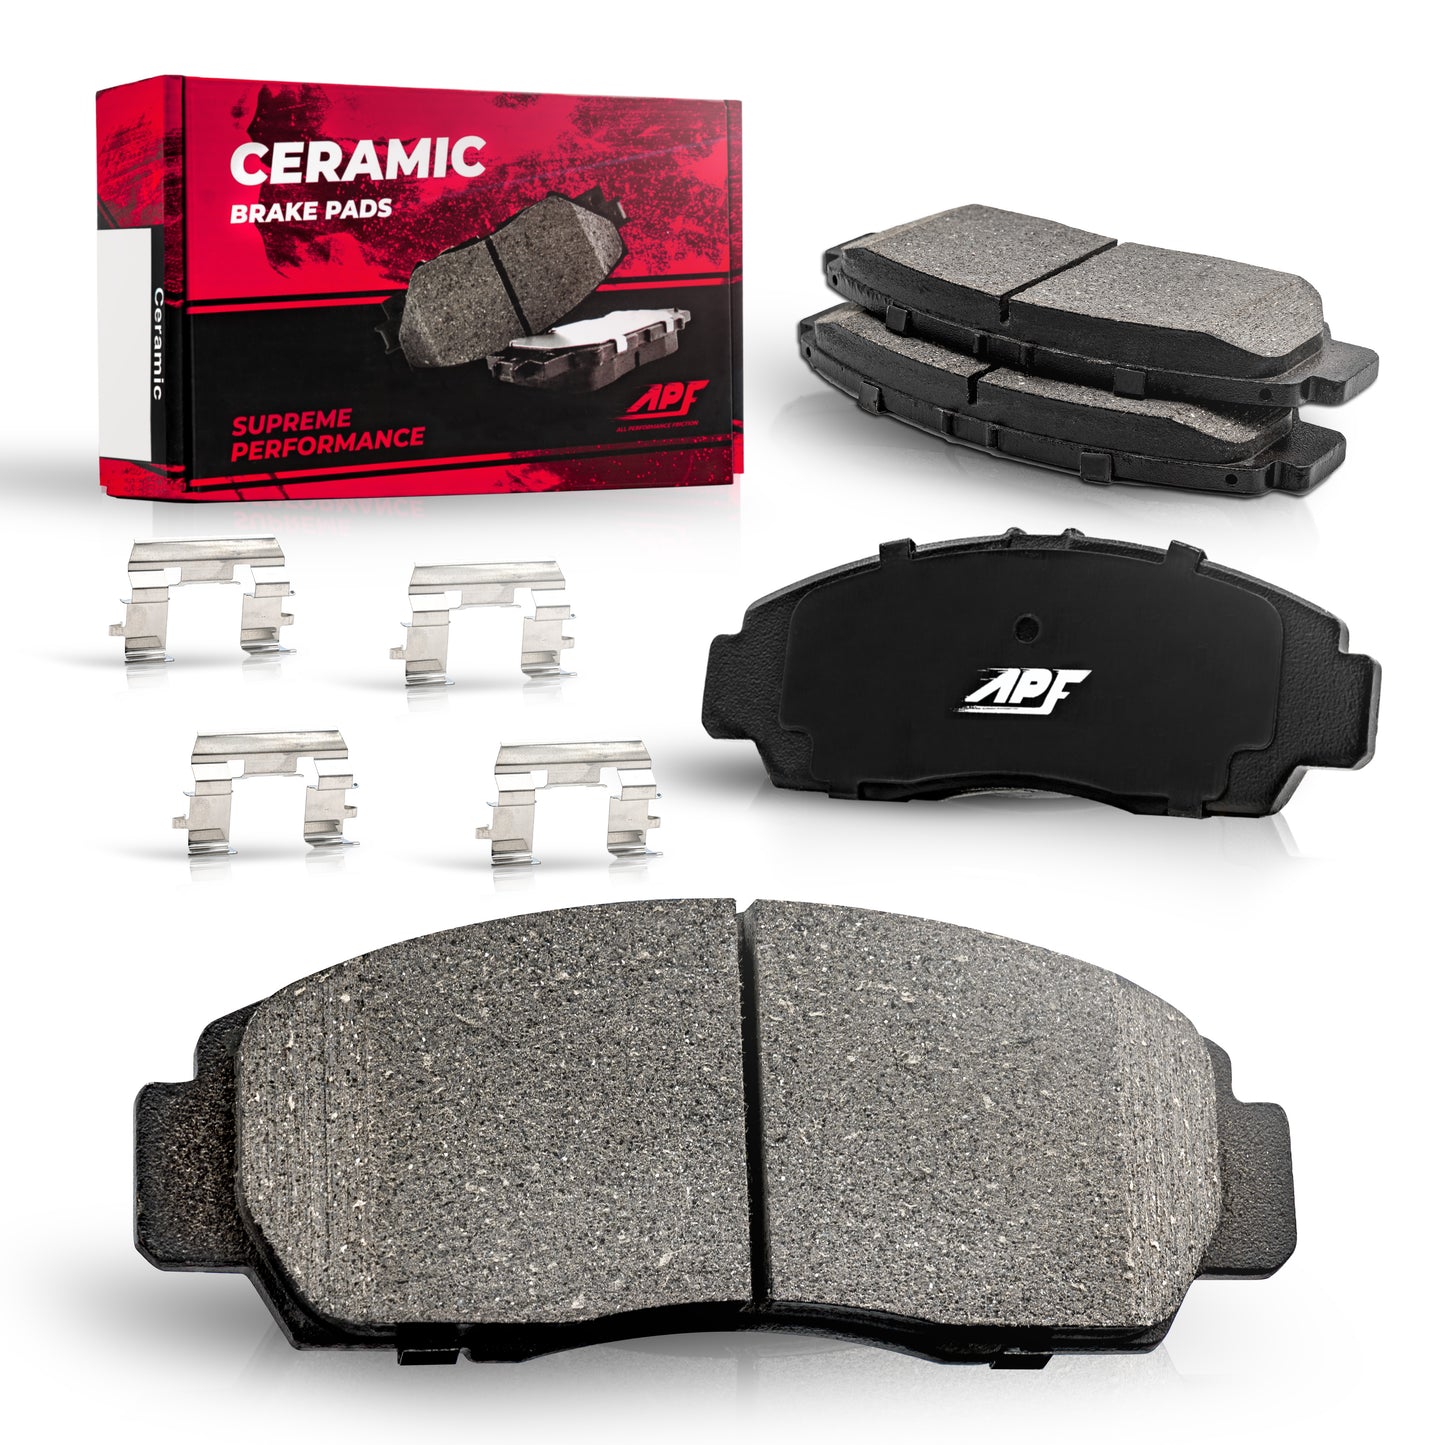 APF Front Pads compatible with 2012-2018 Toyota Prius C Ceramic Carbon Fiber Brake Pads